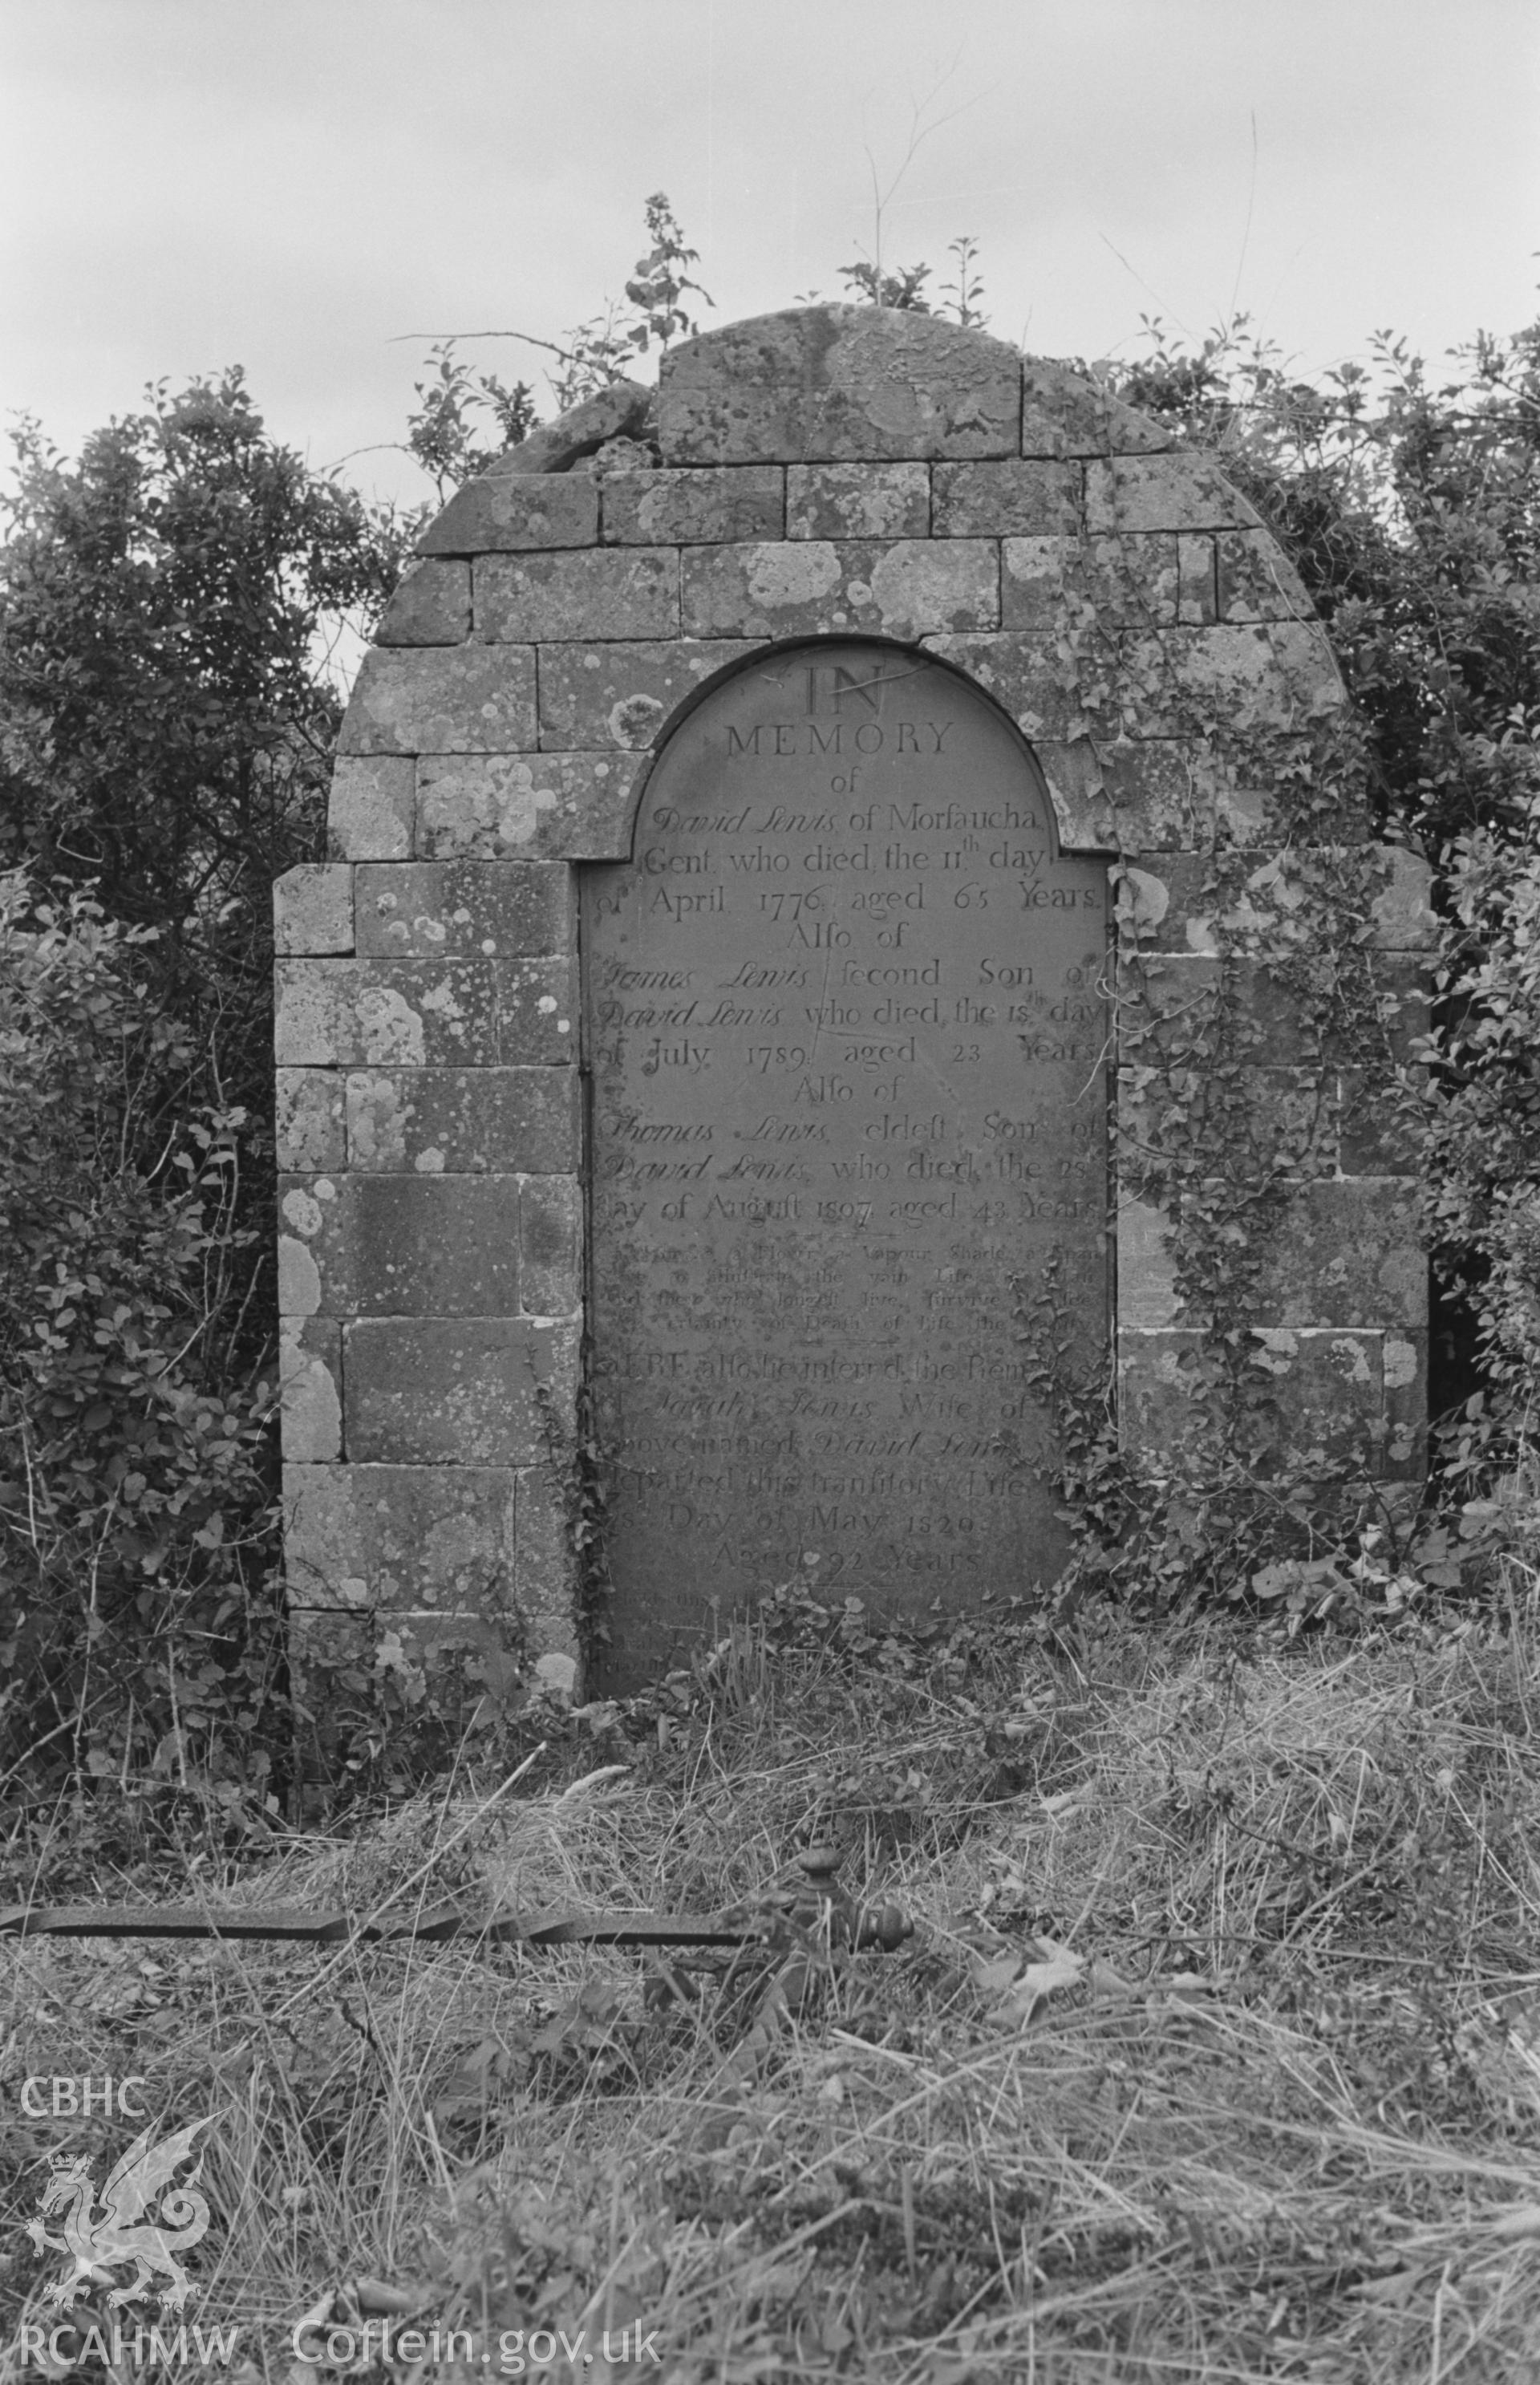 Digital copy of a black and white negative showing memorial to the Lewis family on the western edge of St. Michael's churchyard, Penbryn. Photographed in August 1963 by Arthur O. Chater from Grid Reference SN 2933 5211, looking west.